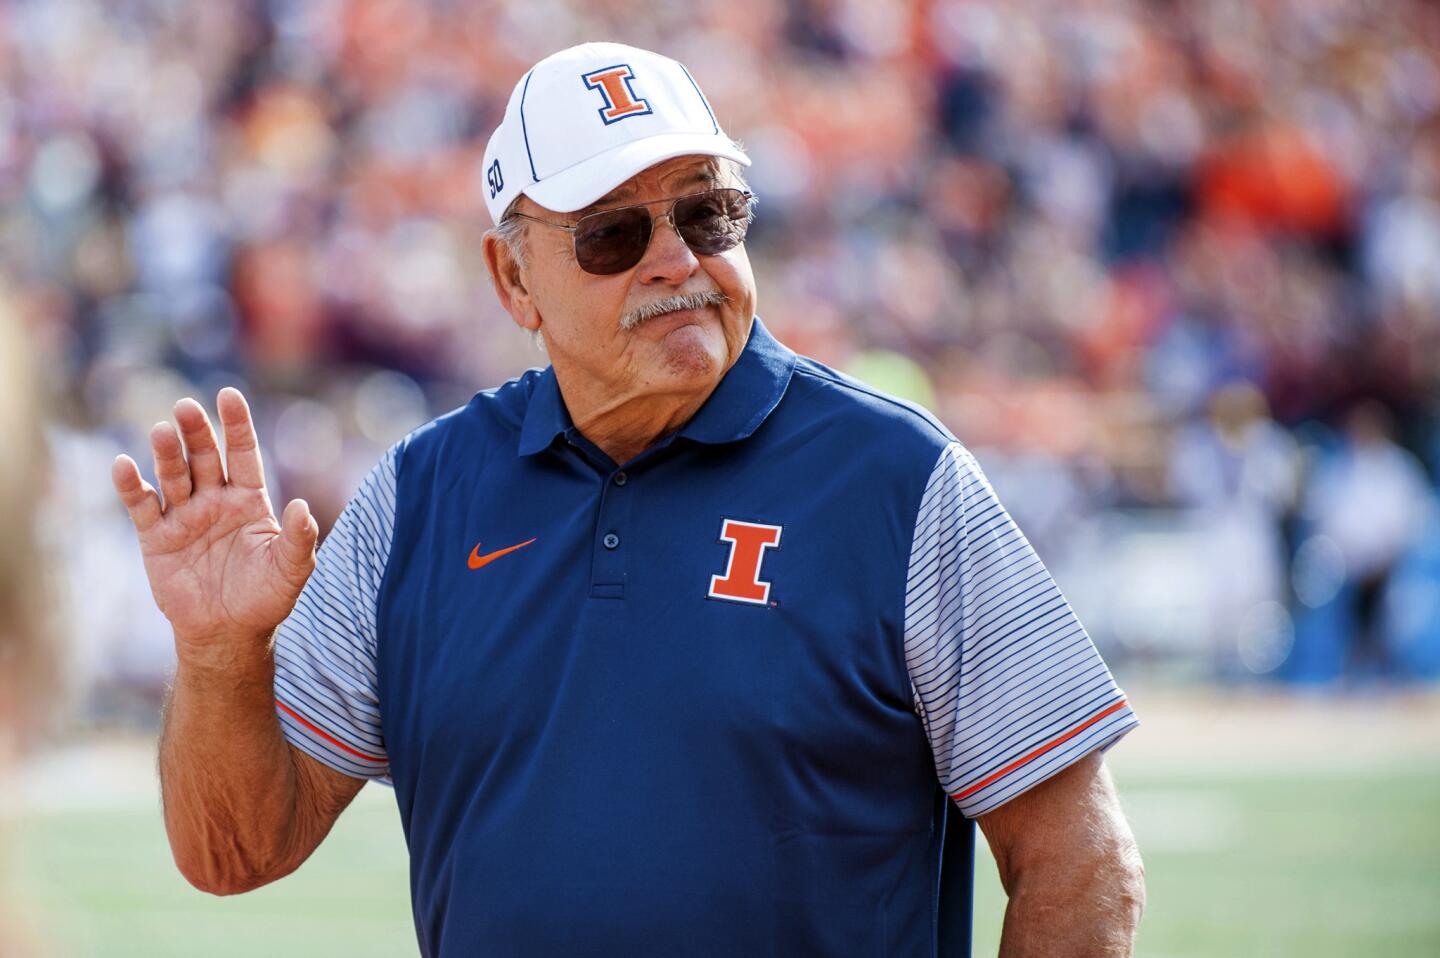 Dick Butkus, former Illinois and Bears linebacker, is recognized during a timeout as the first inductee of the Illinois Athletics Hall of Fame during a game against Minnesota at Memorial Stadium in Champaign on Oct. 29, 2016.